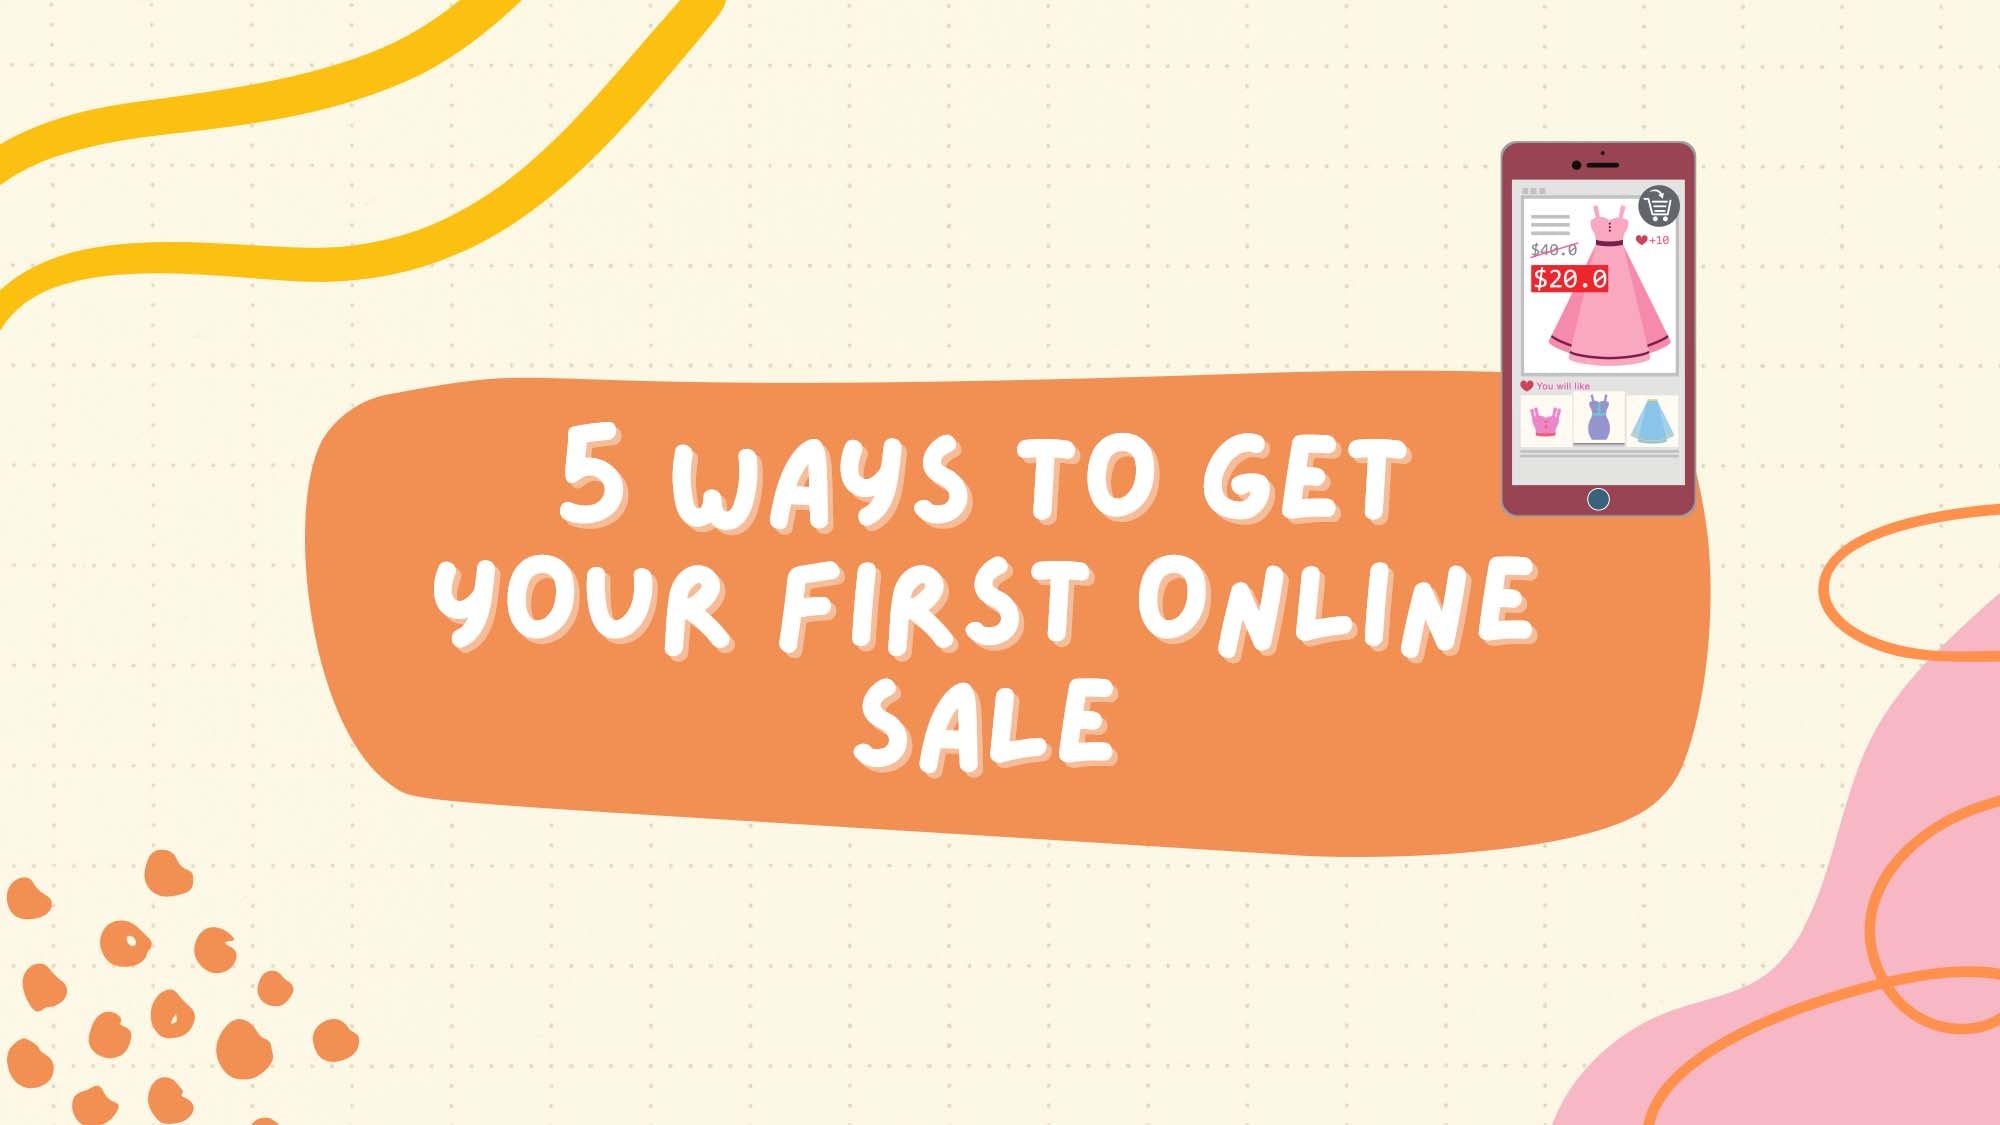 Your E-Commerce Checklist: 5 Tips on How to Make Your First Online Sale